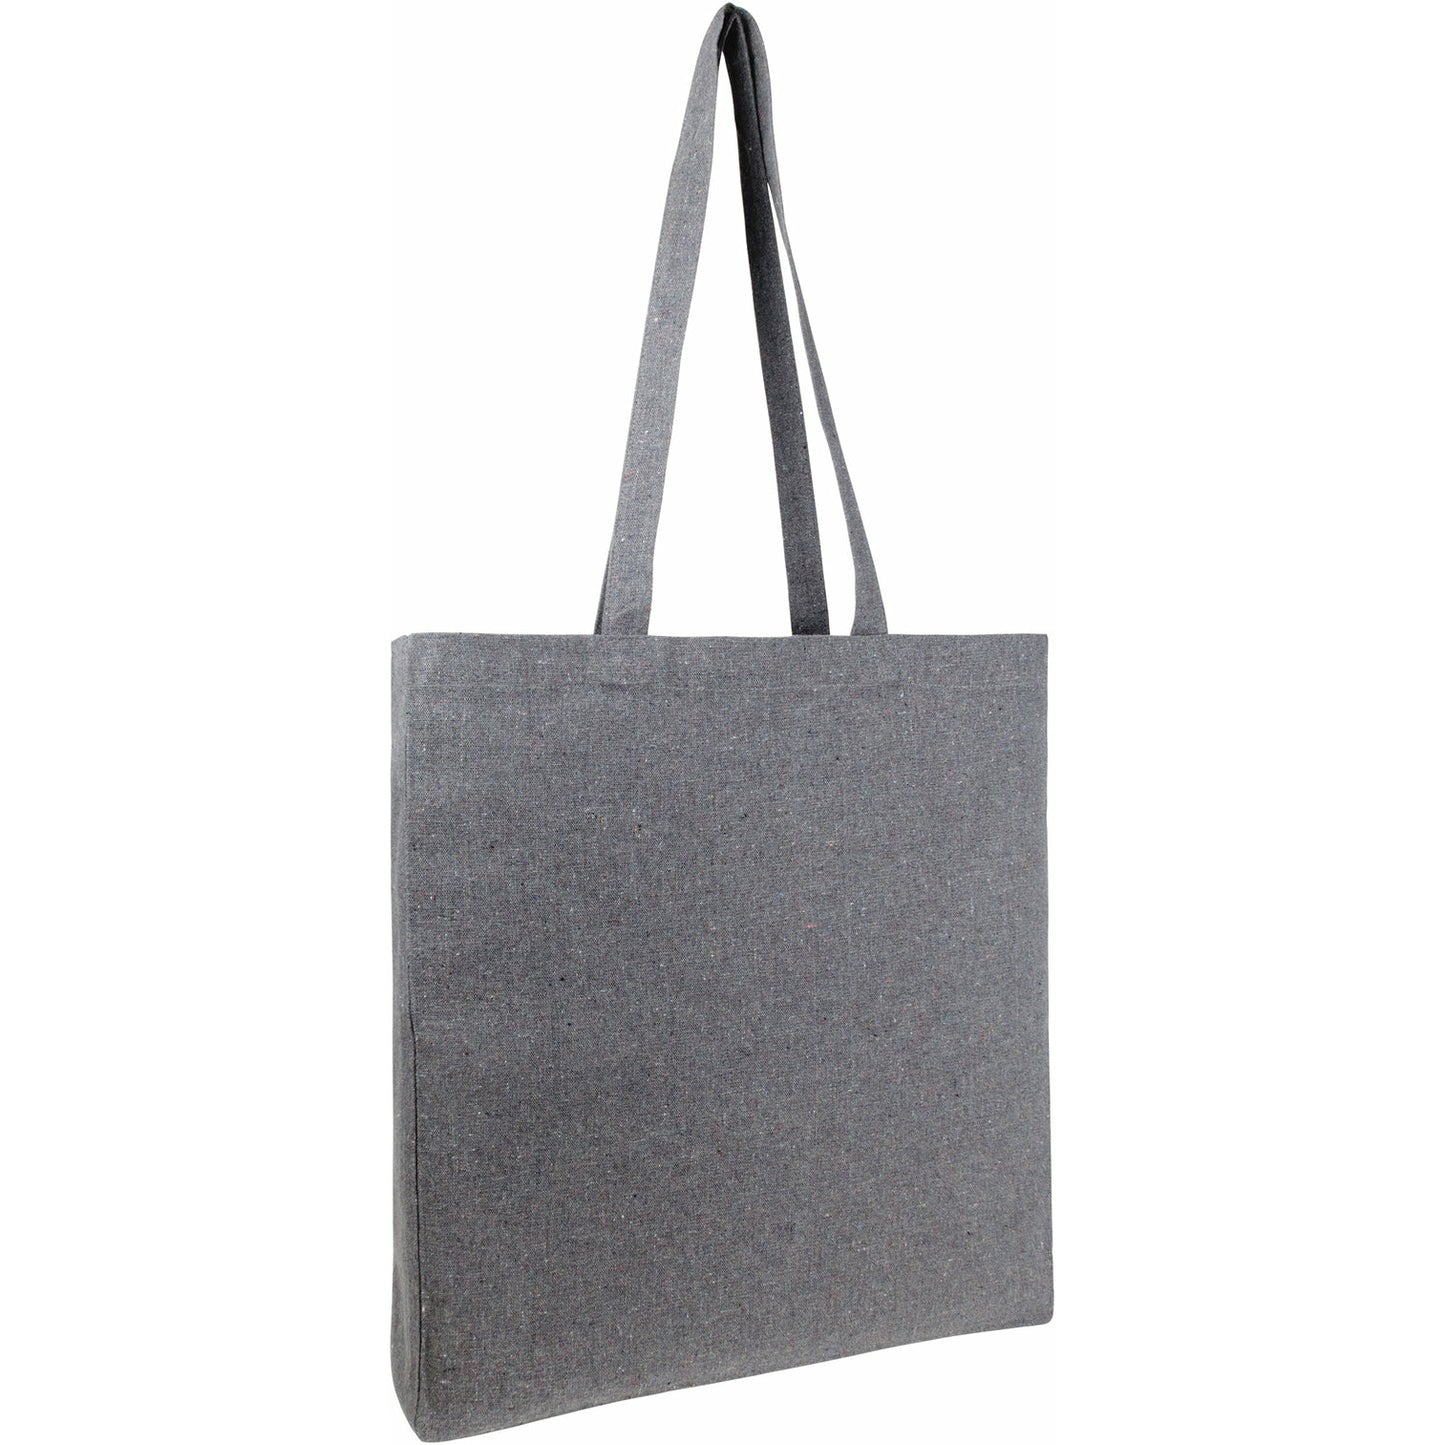 Newchurch Eco Recycled Cotton Big Tote Shopper Bags   